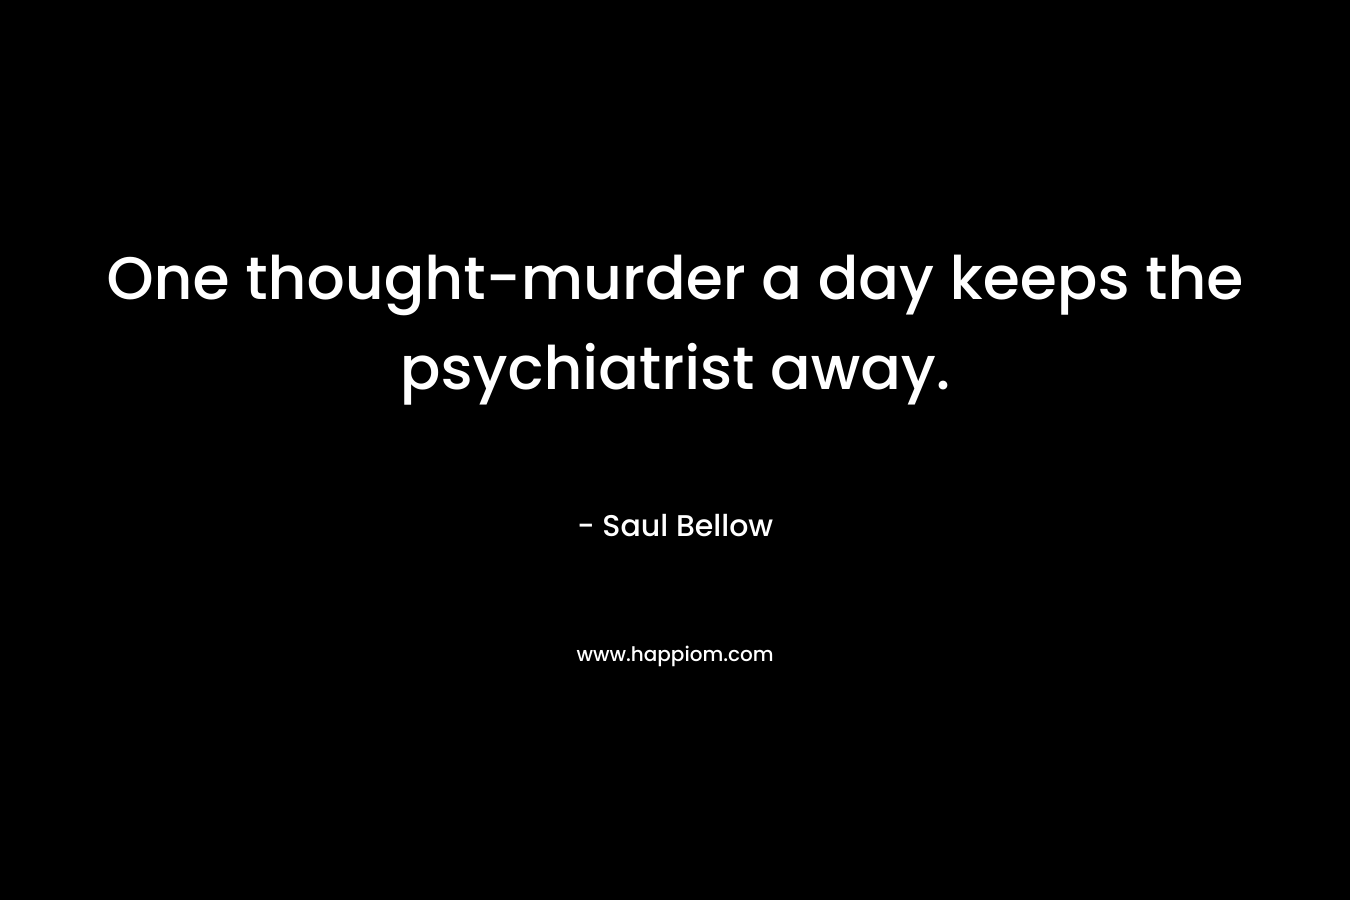 One thought-murder a day keeps the psychiatrist away.